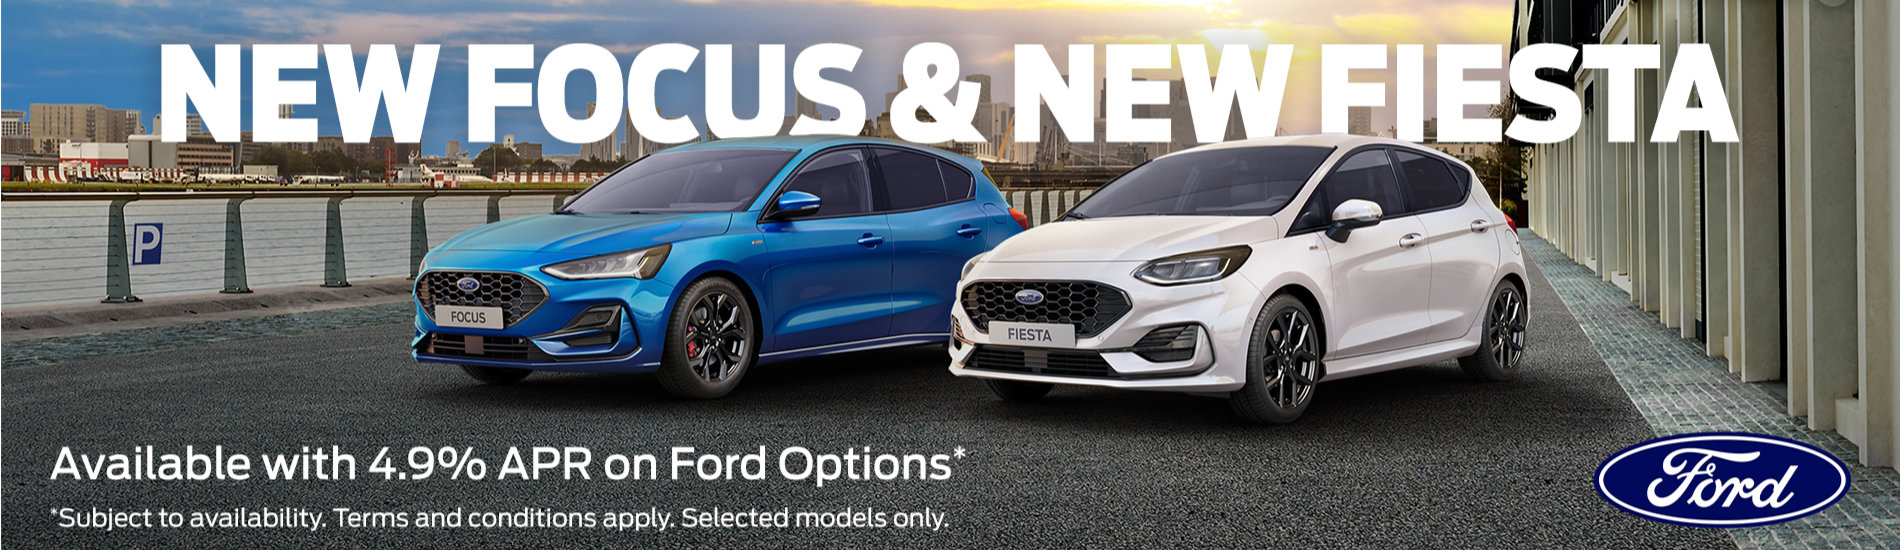 NEW FORD FOCUS AND FIESTA